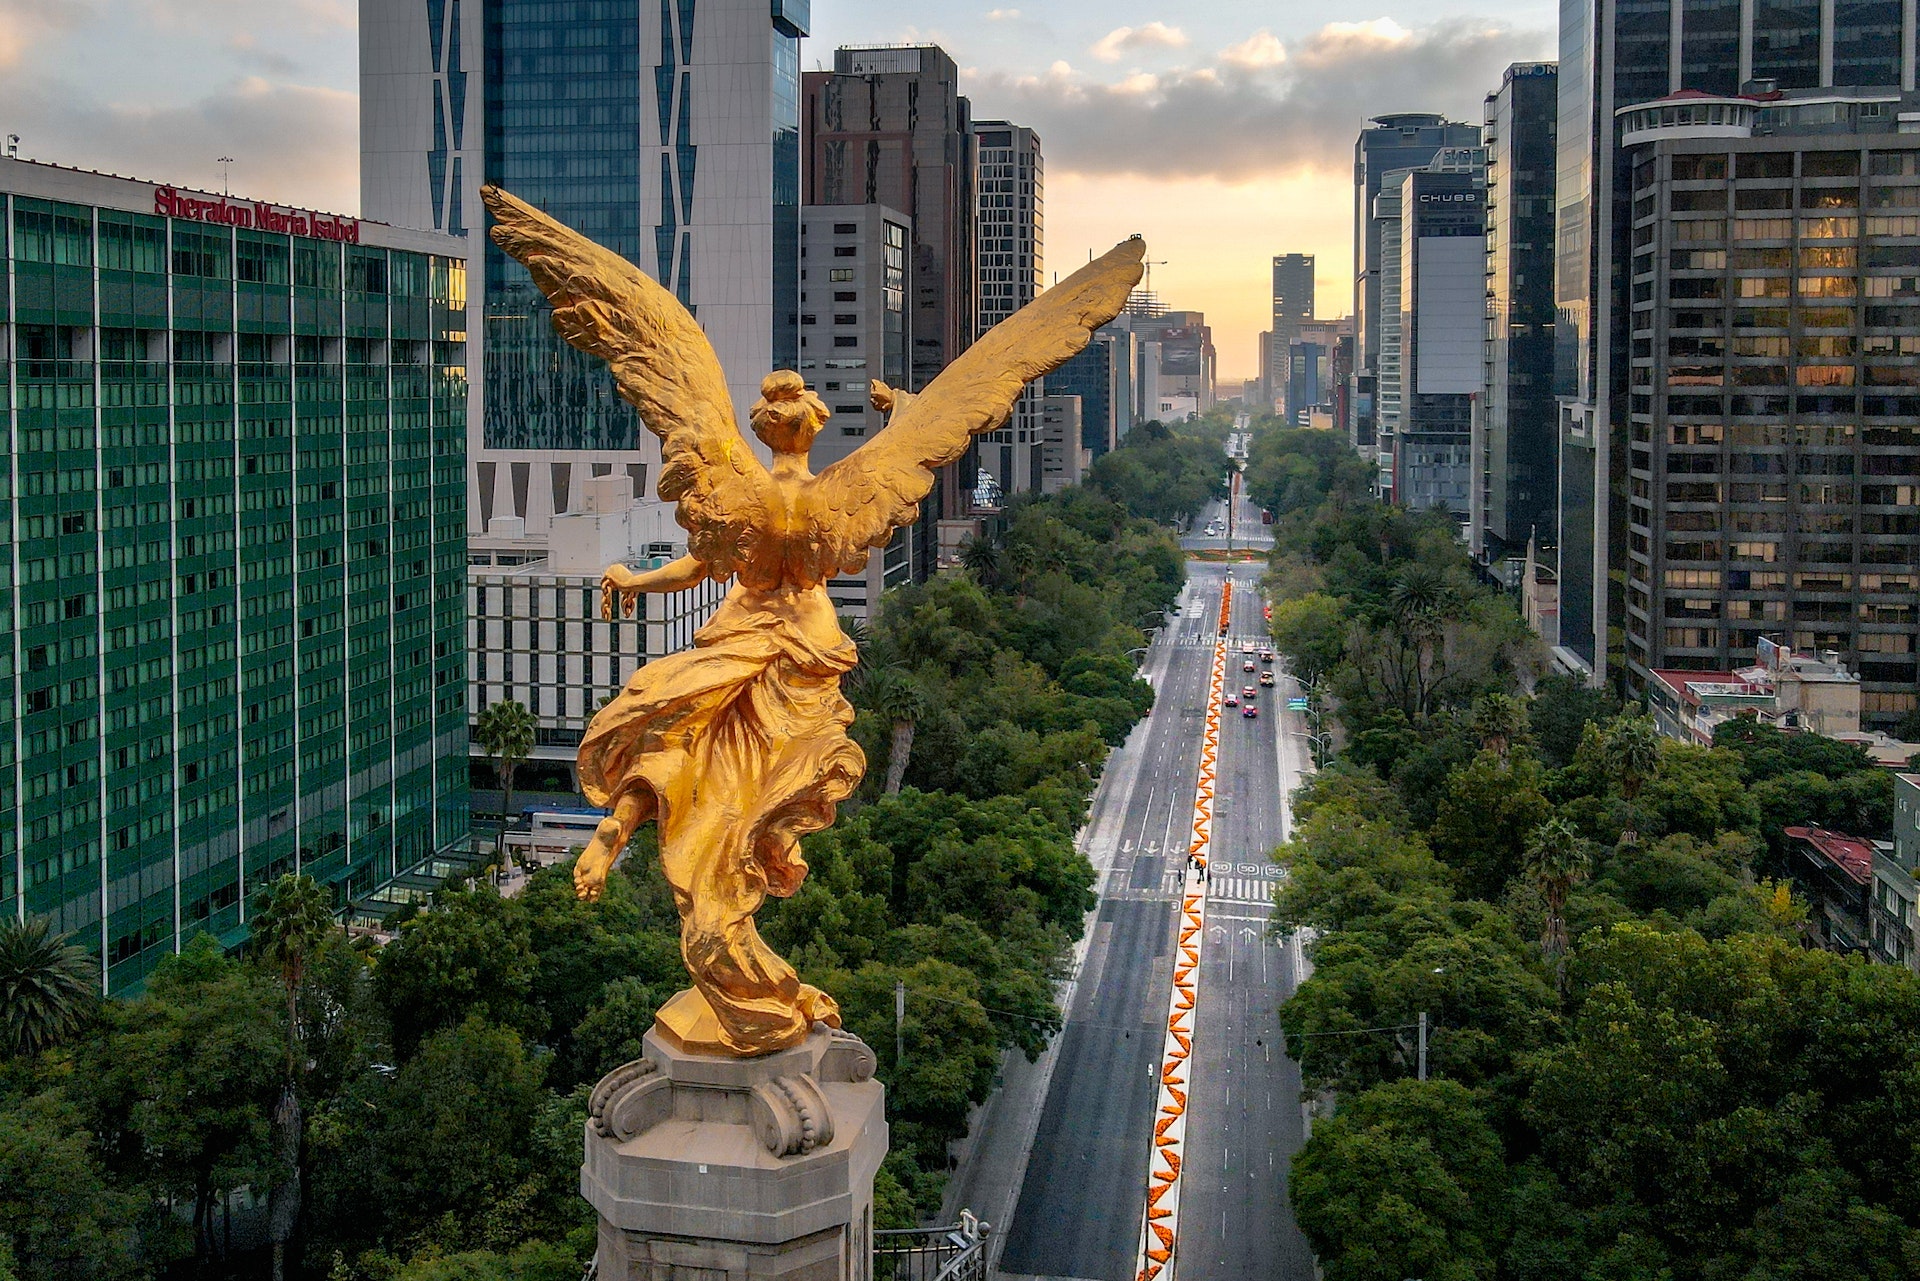 Photo by Victor Armas: https://www.pexels.com/photo/angel-of-independence-statue-in-mexico-city-13100888/